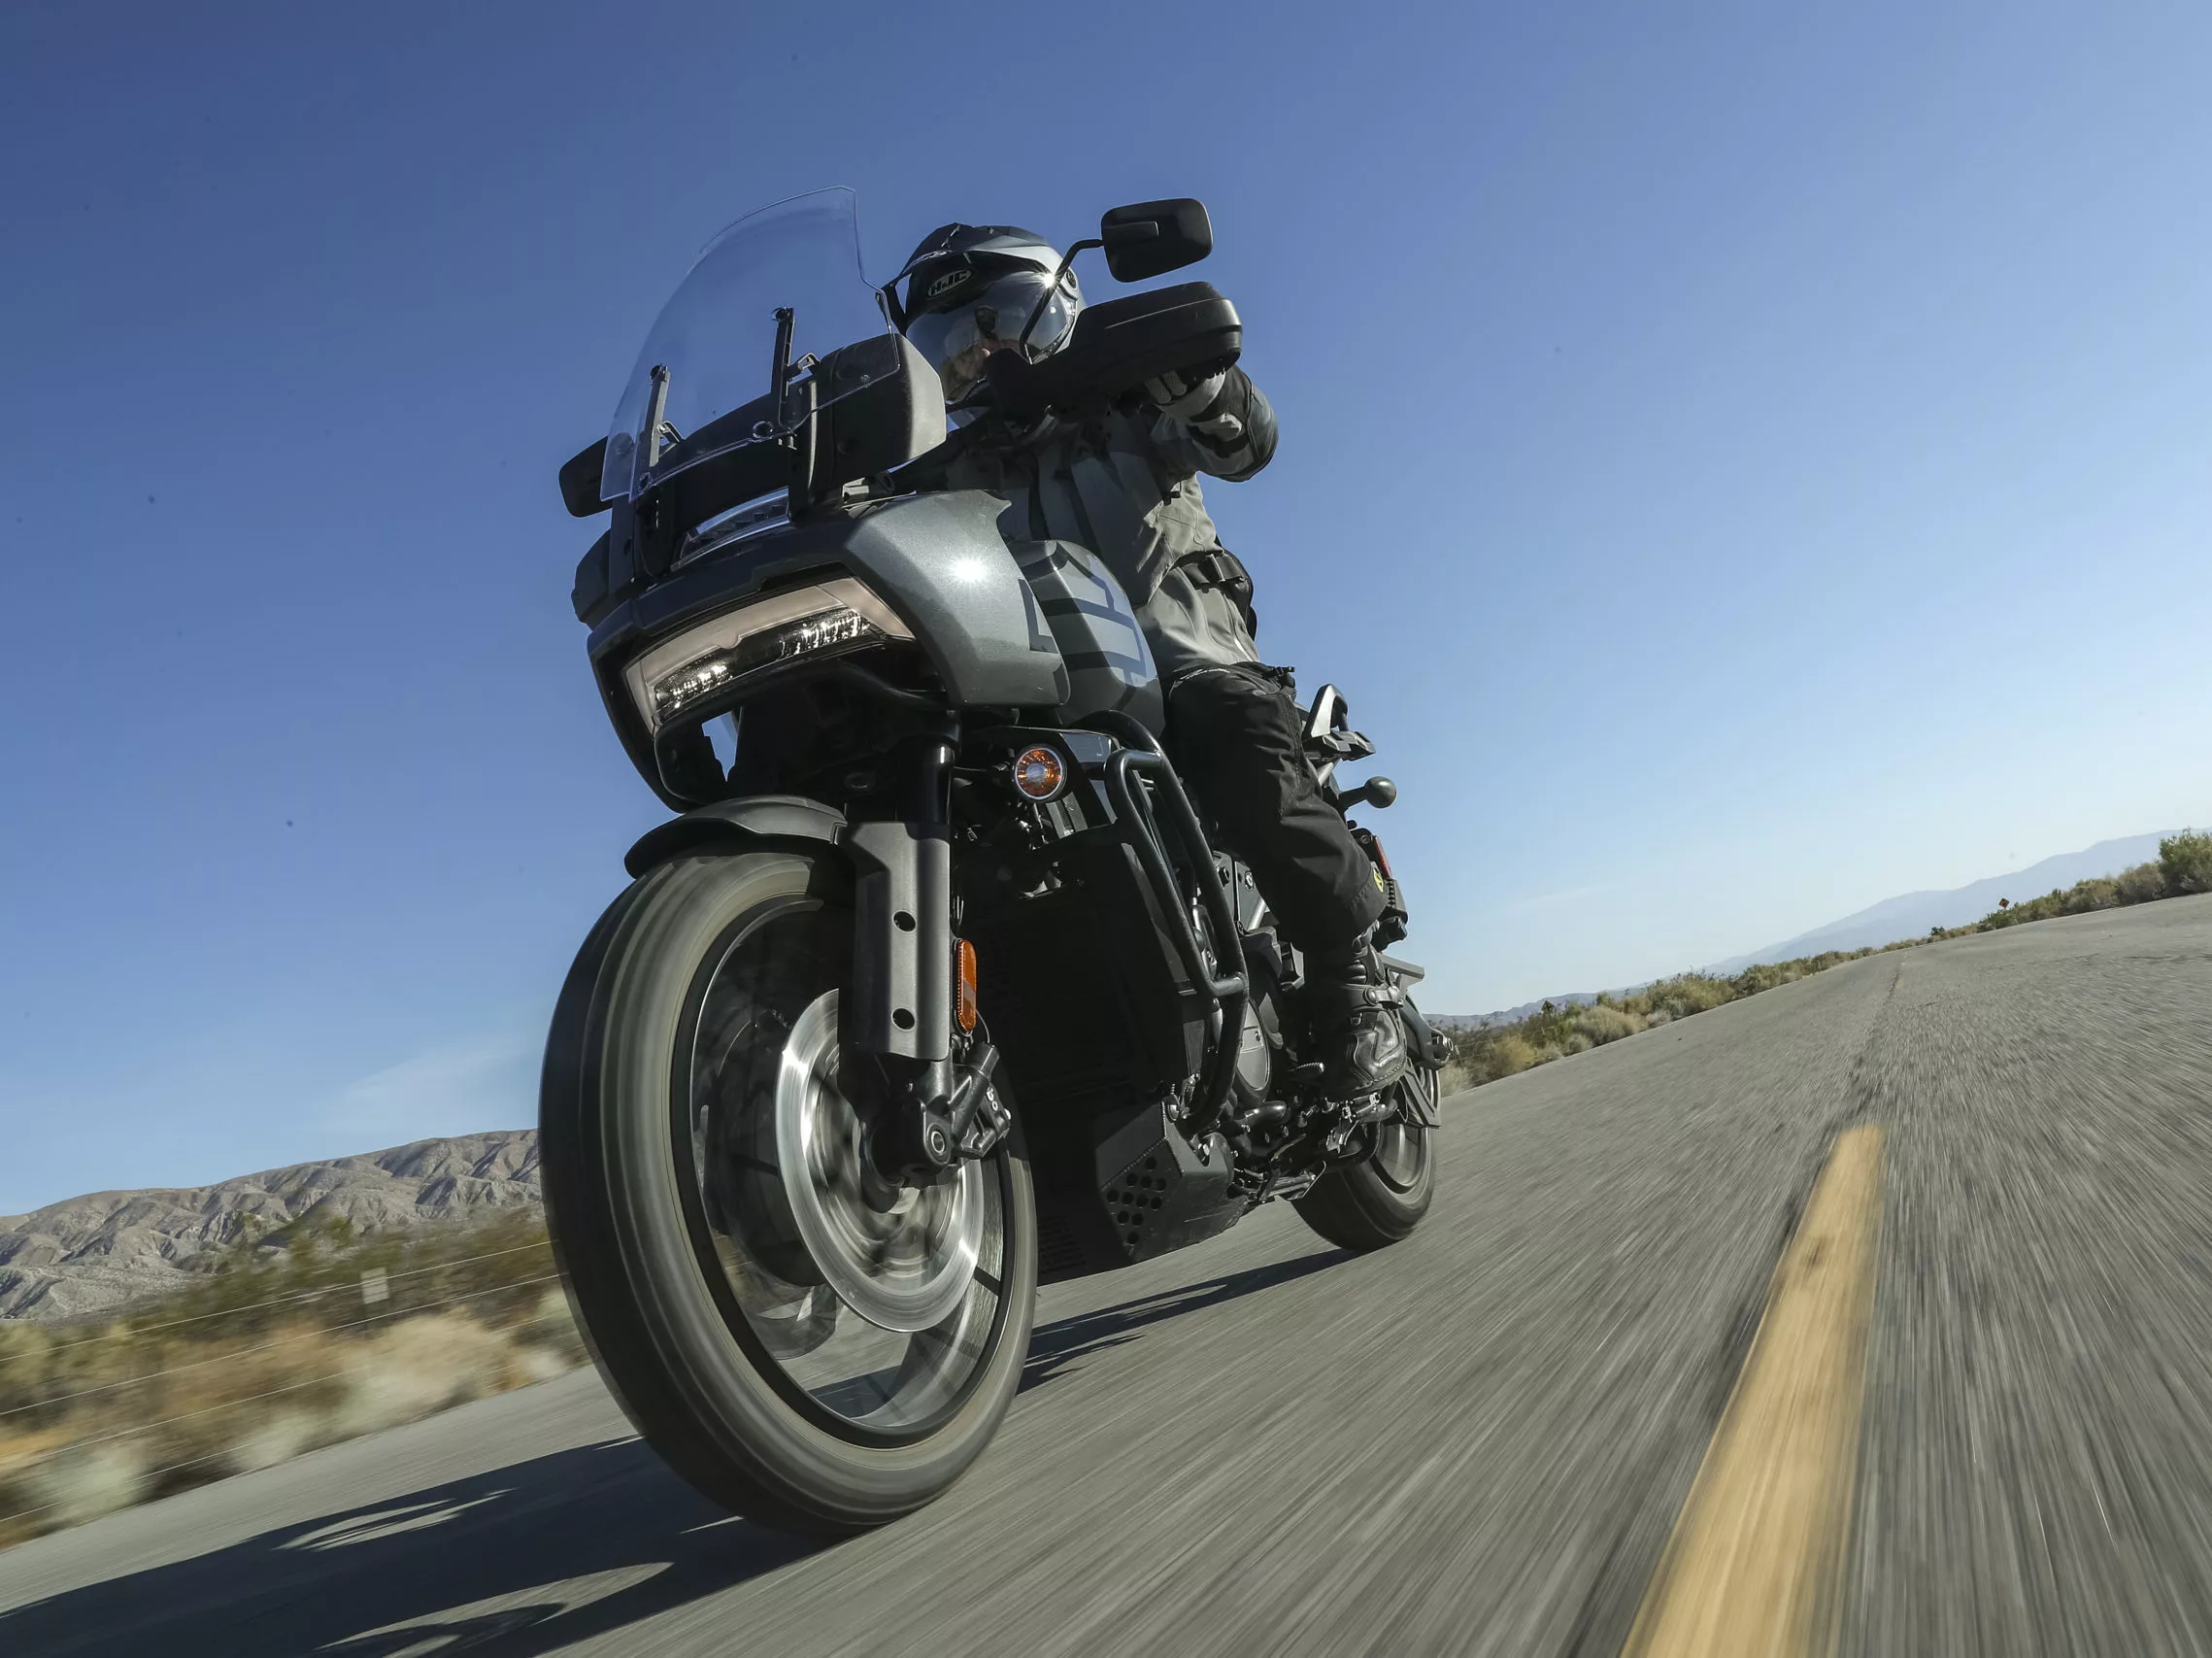 Chicago Motorcycle Rental in USA, North America | Motorcycles - Rated 0.9